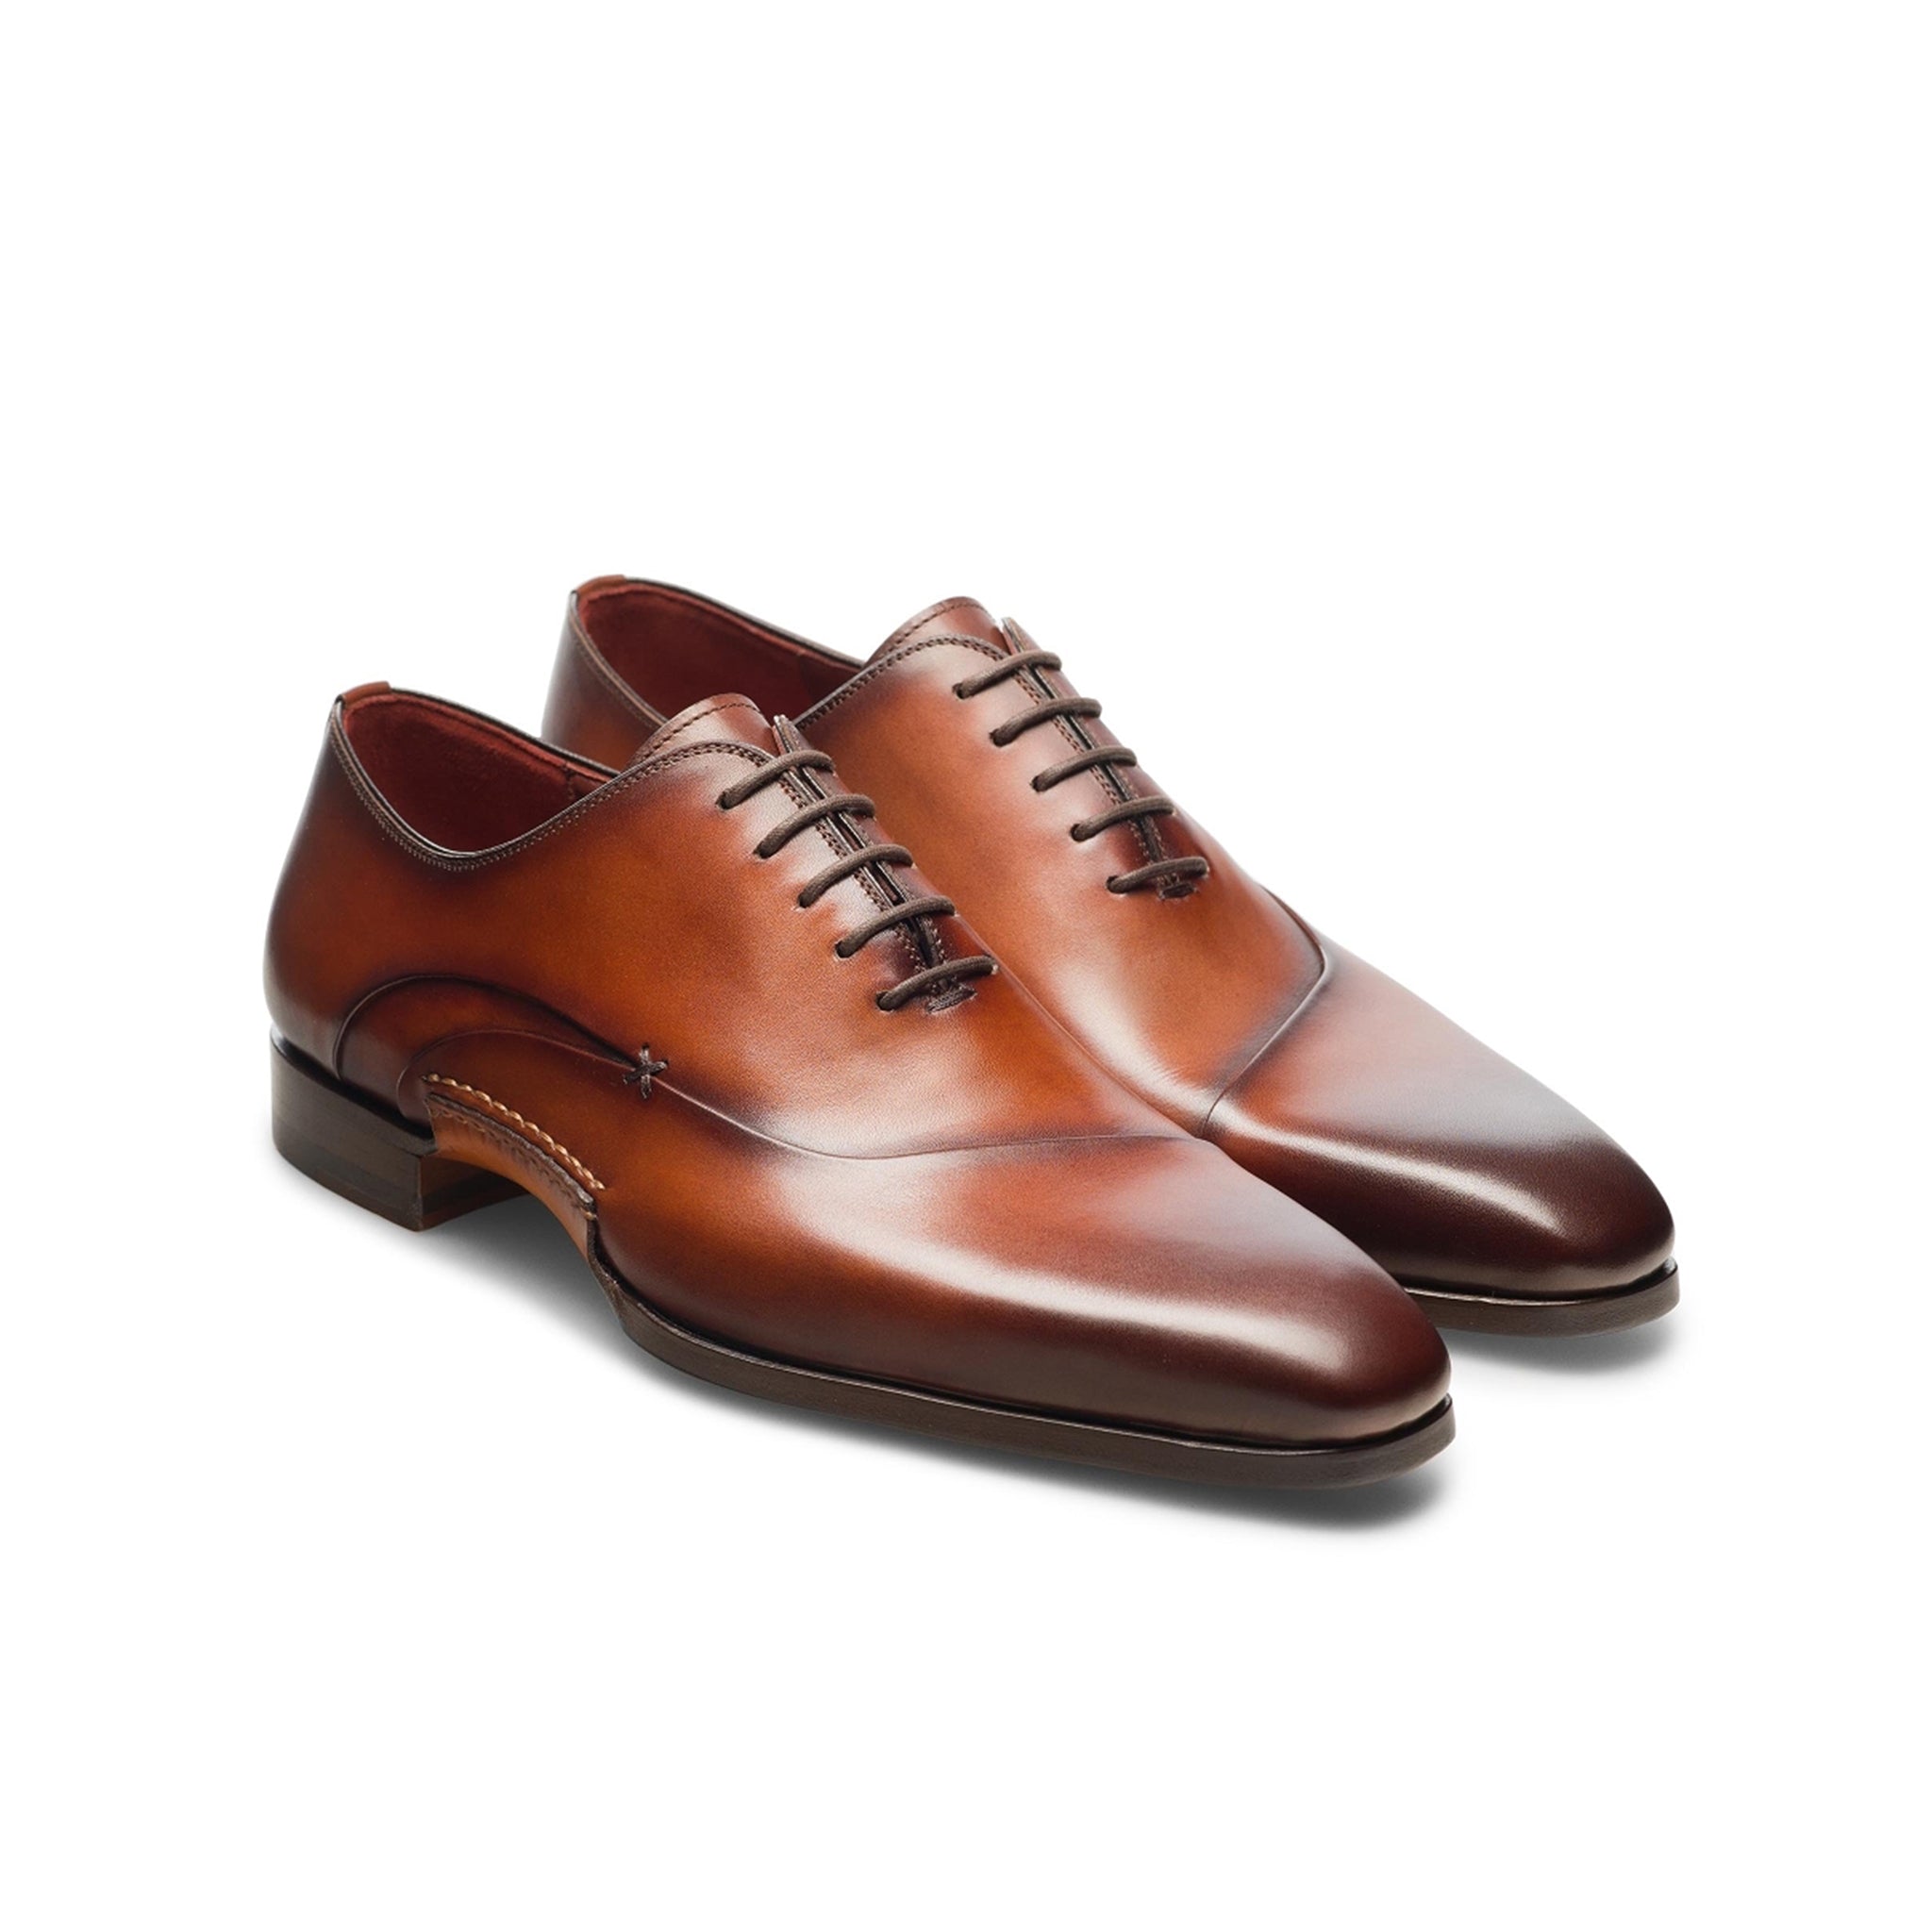 Keith Oxford Lace Up Shoes